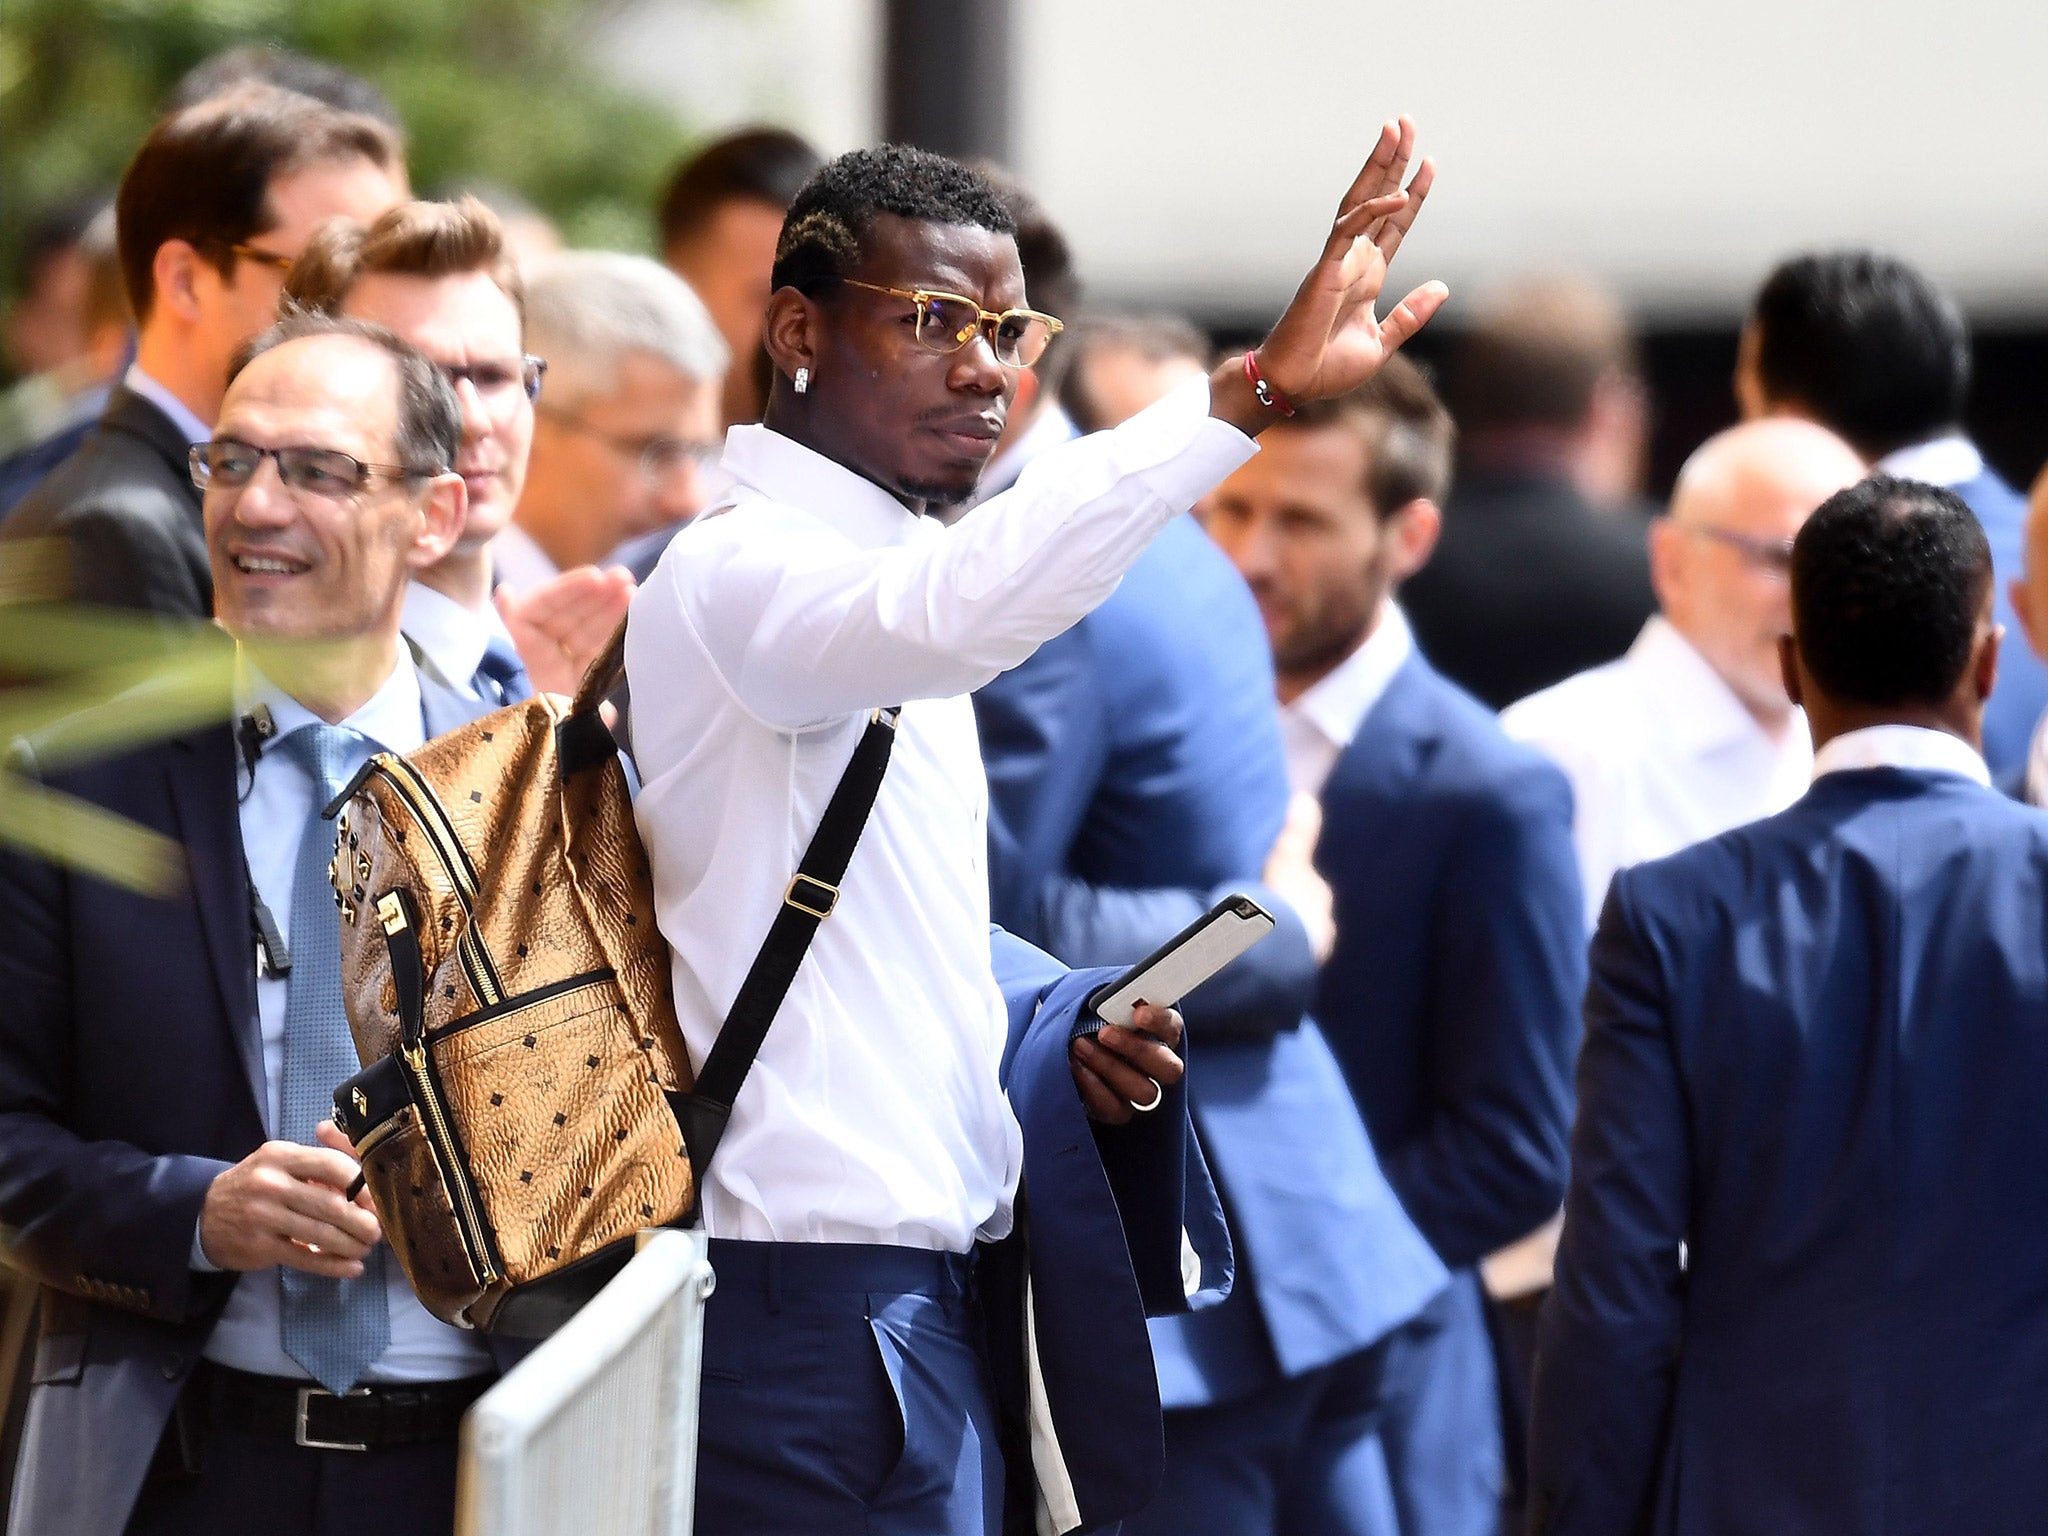 Real Madrid are believed to have scrapped a bid for Paul Pogba, opening the door for Manchester United